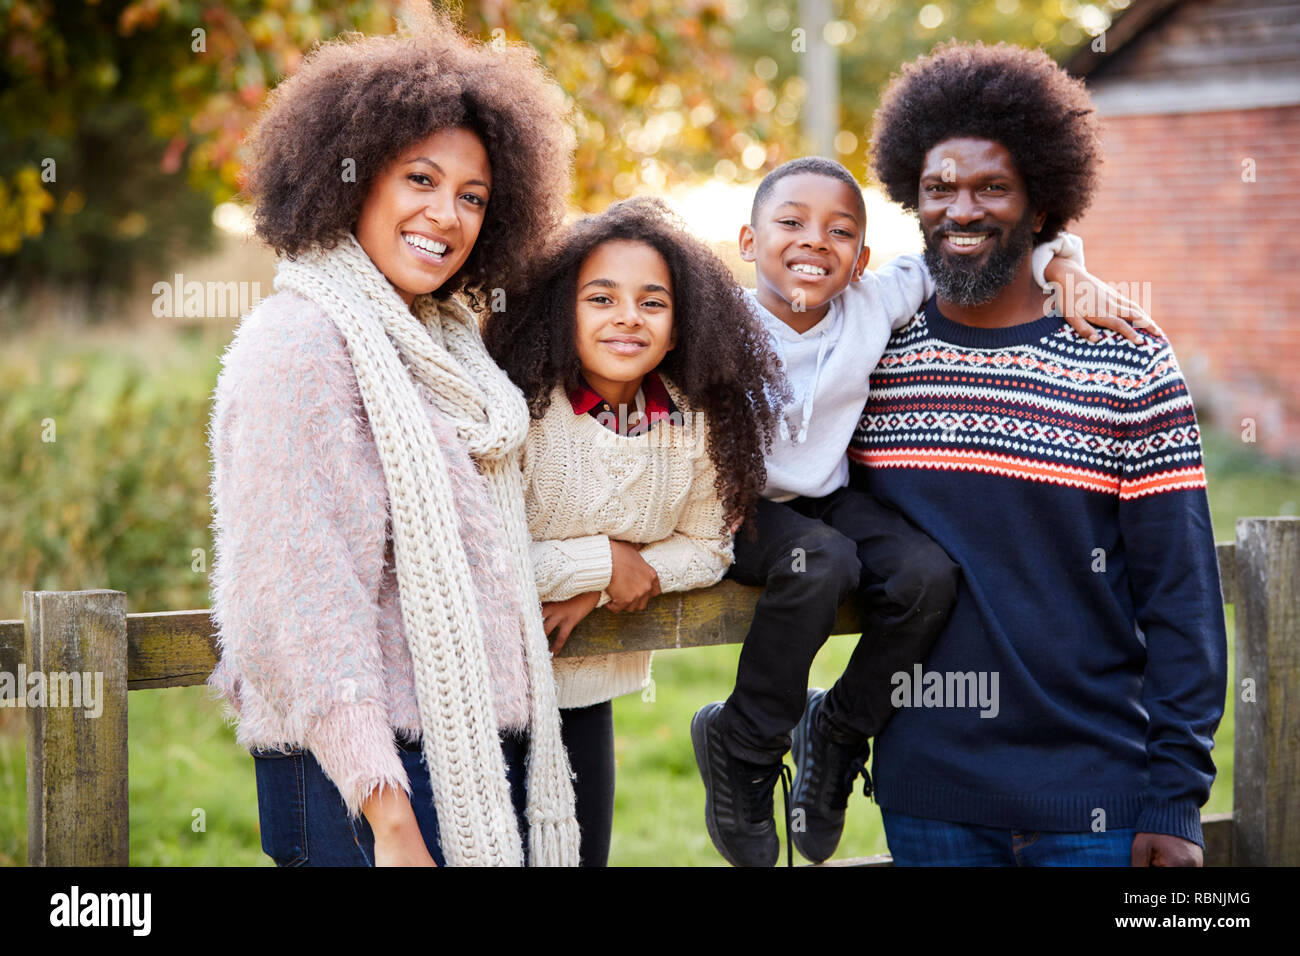 Portrait Of Family On Autumn Walk In Countryside Together Stock Photo